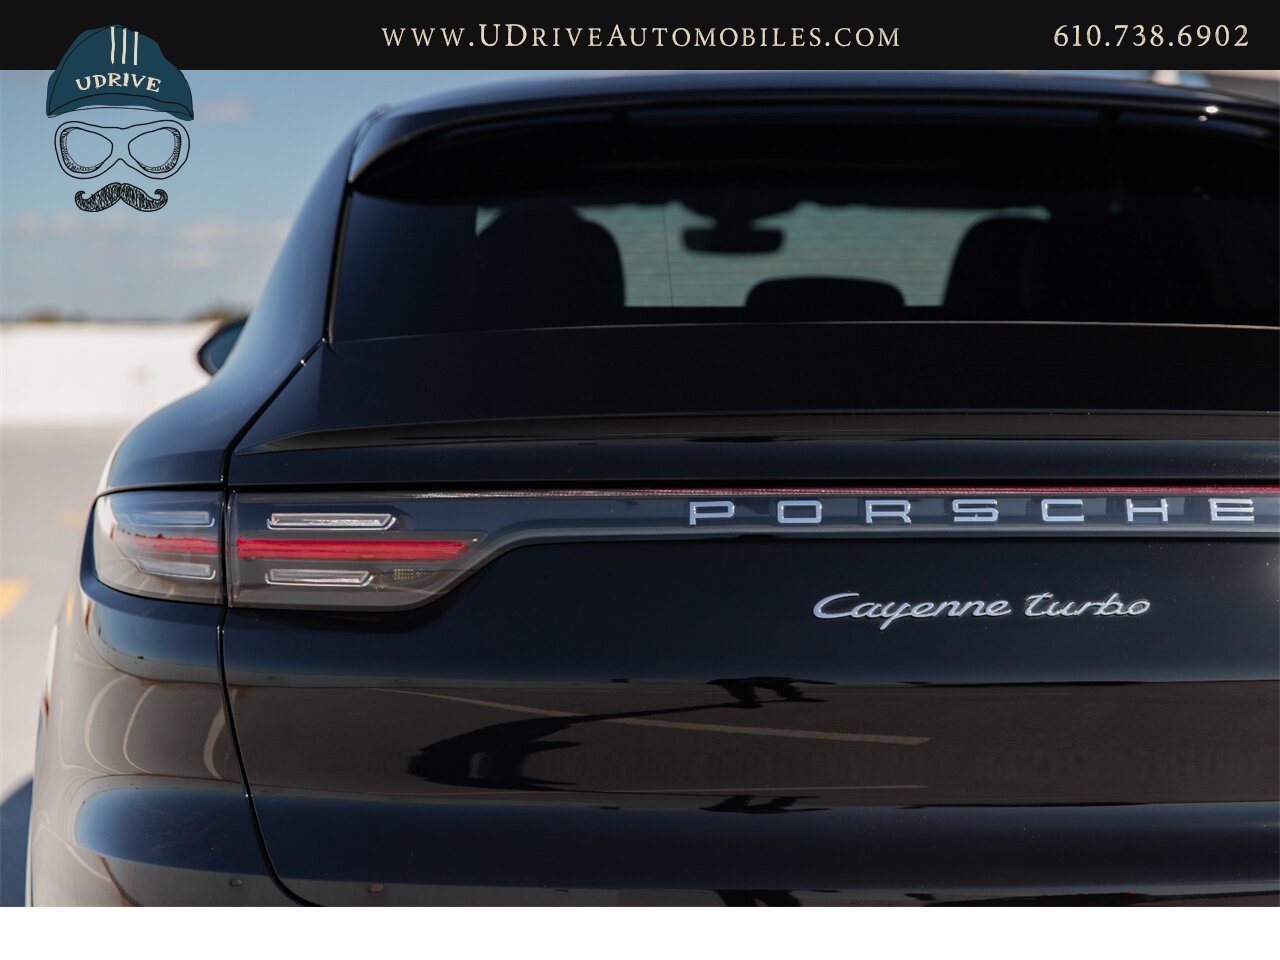 2020 Porsche Cayenne Turbo Coupe 2+1 Rear Comf Seats Prem Plus  22in Turbo Design Whls Sport Exhst Adap Cruise Surround View - Photo 22 - West Chester, PA 19382